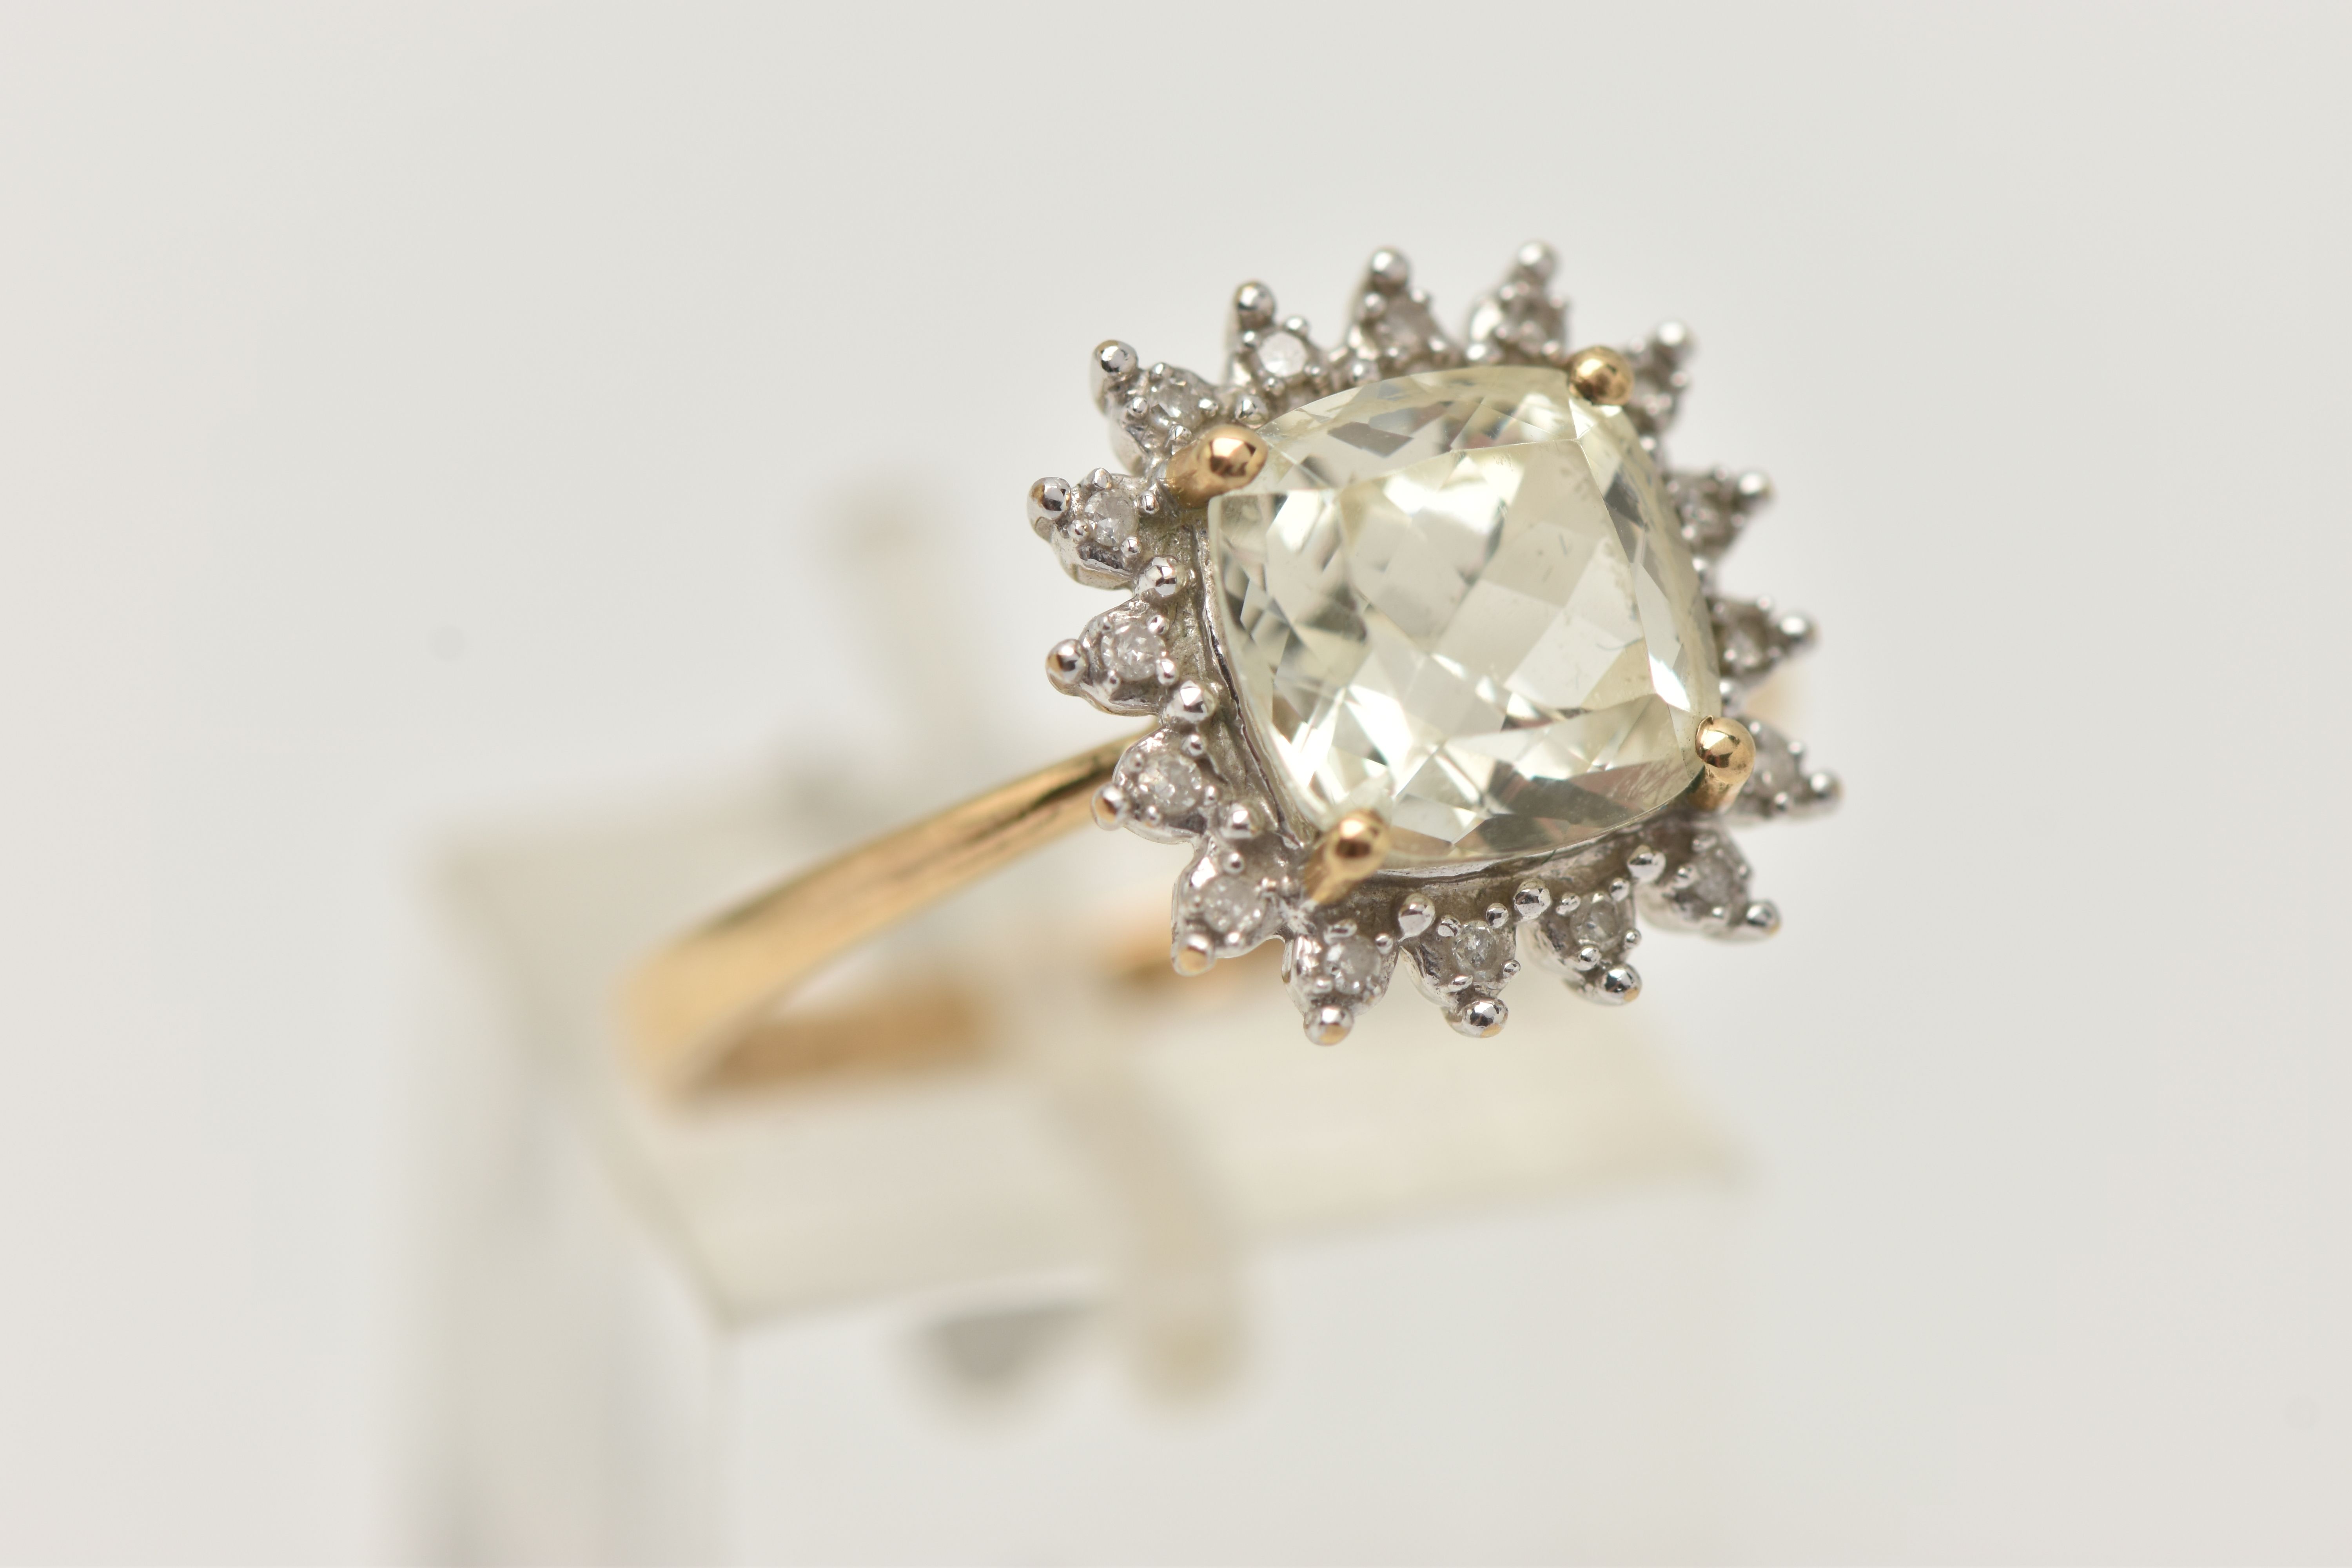 A 9CT GOLD GEM SET CLUSTER RING, mixed cushion cut colourless stone, possibly topaz, measuring - Image 4 of 4